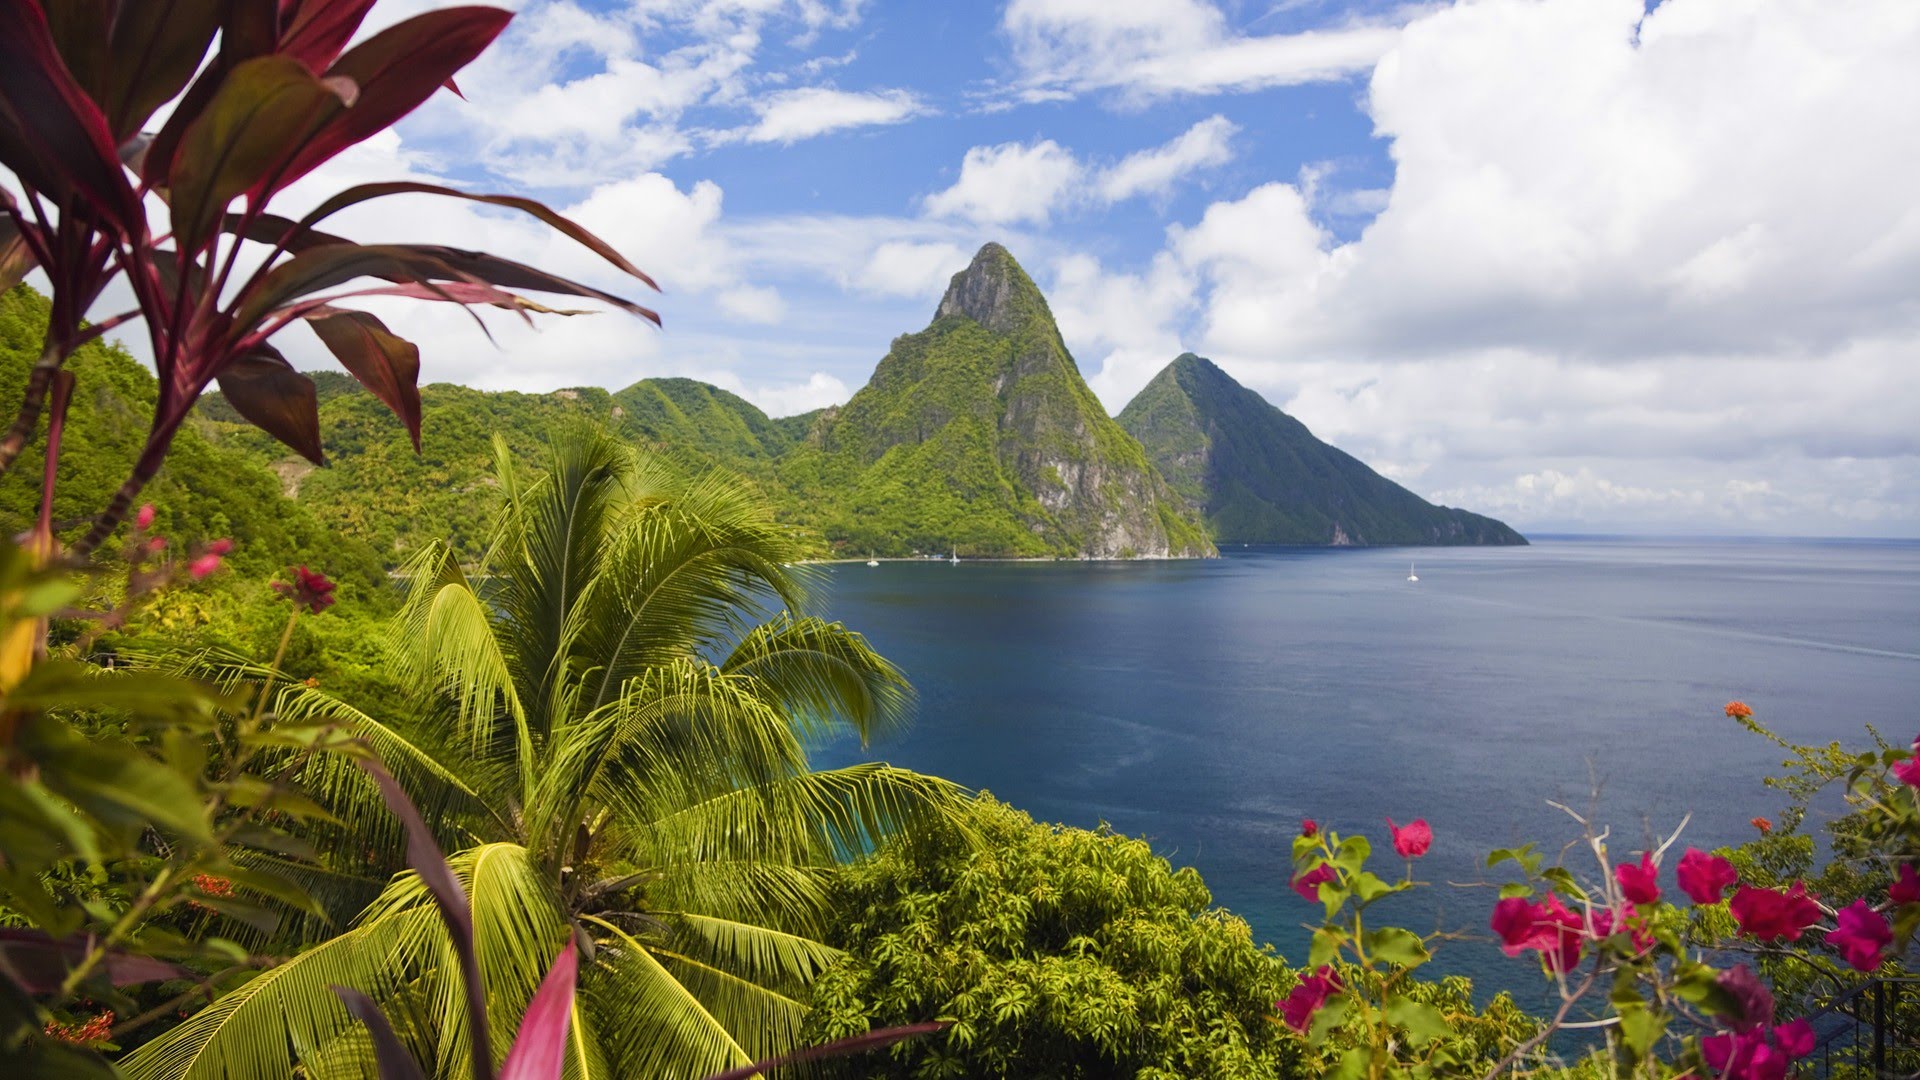 St Lucia Resorts: Best Resorts in St Lucia as voted by travelers ...